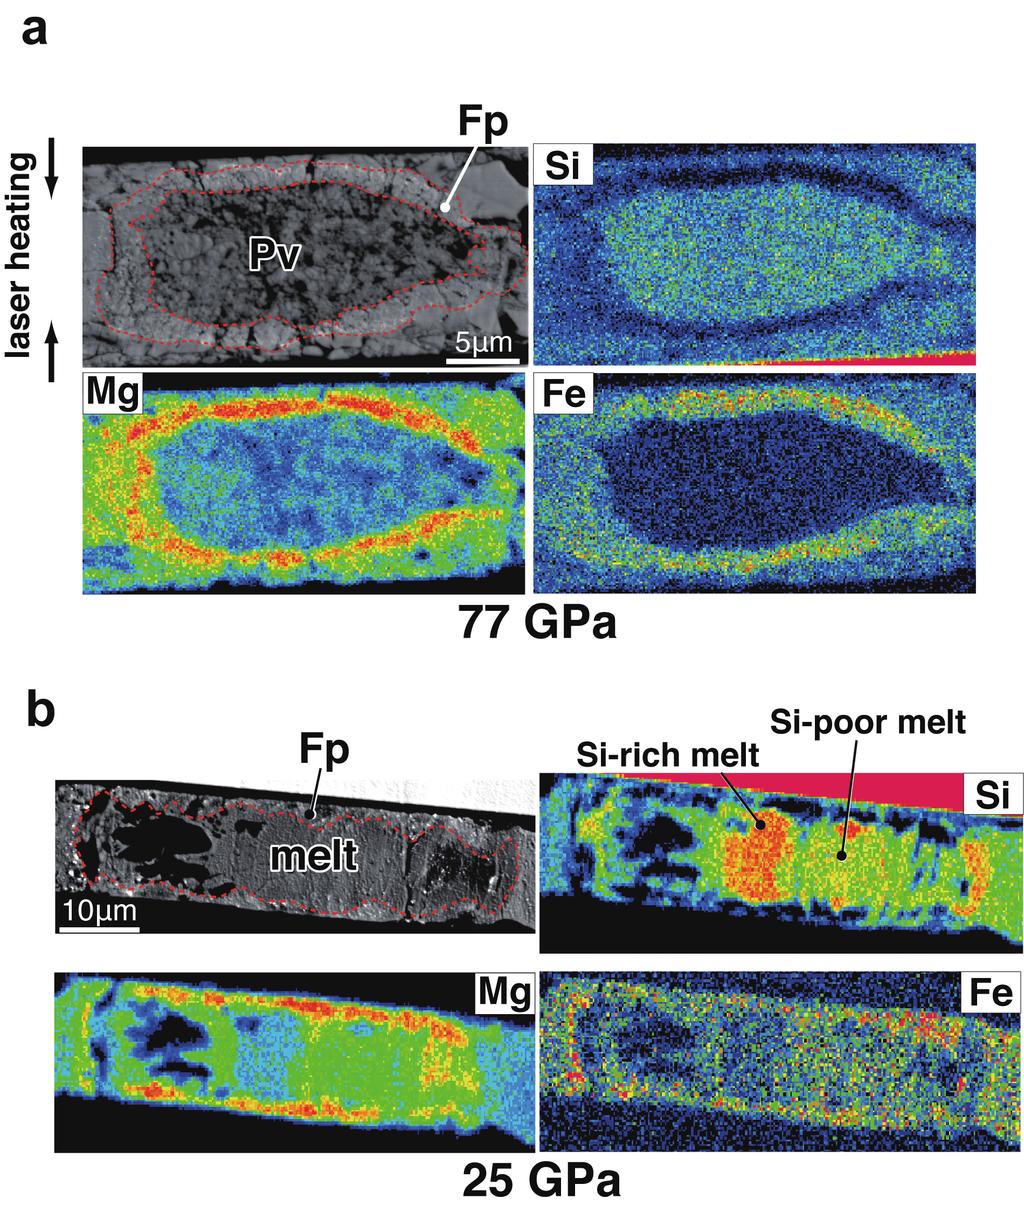 doi:10.1038/nature09940 Supplementary Figure 3 Backscattered electron images and the x-ray maps for Si, Mg, and Fe for (a) unmelted and (b) melted samples with relatively long heating duration.